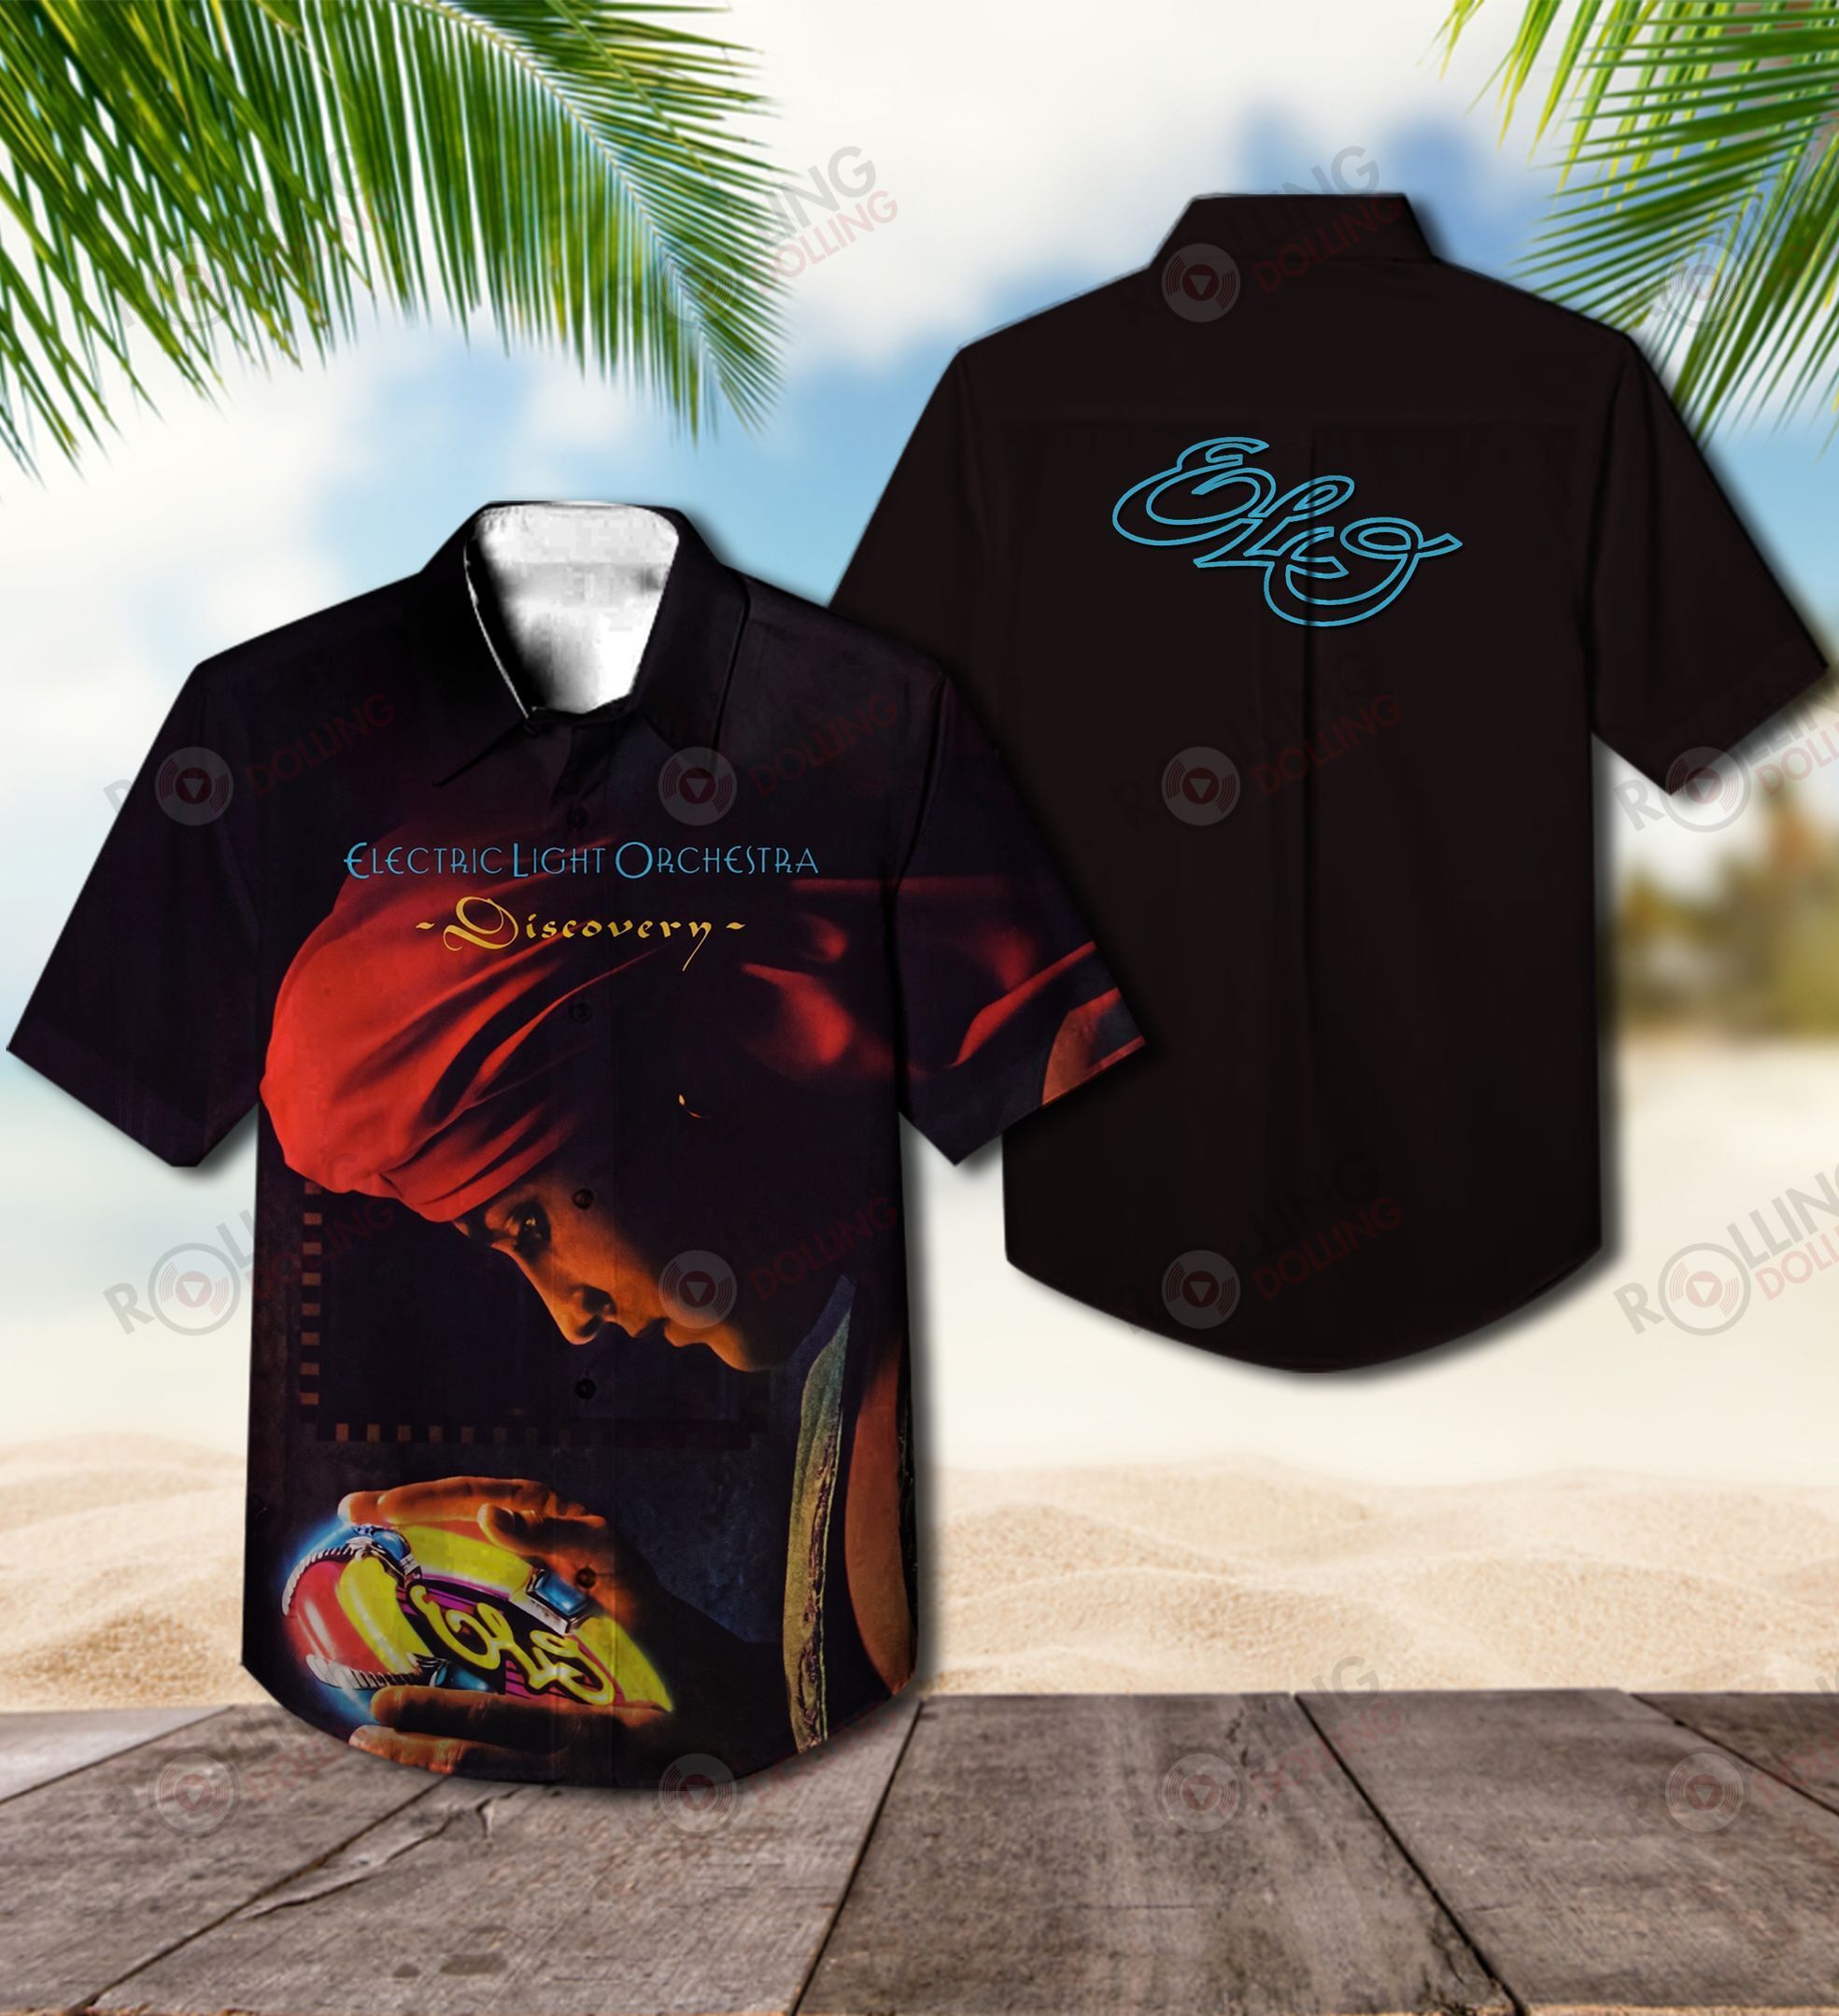 We have compiled a list of some of the best Hawaiian shirt that are available 259